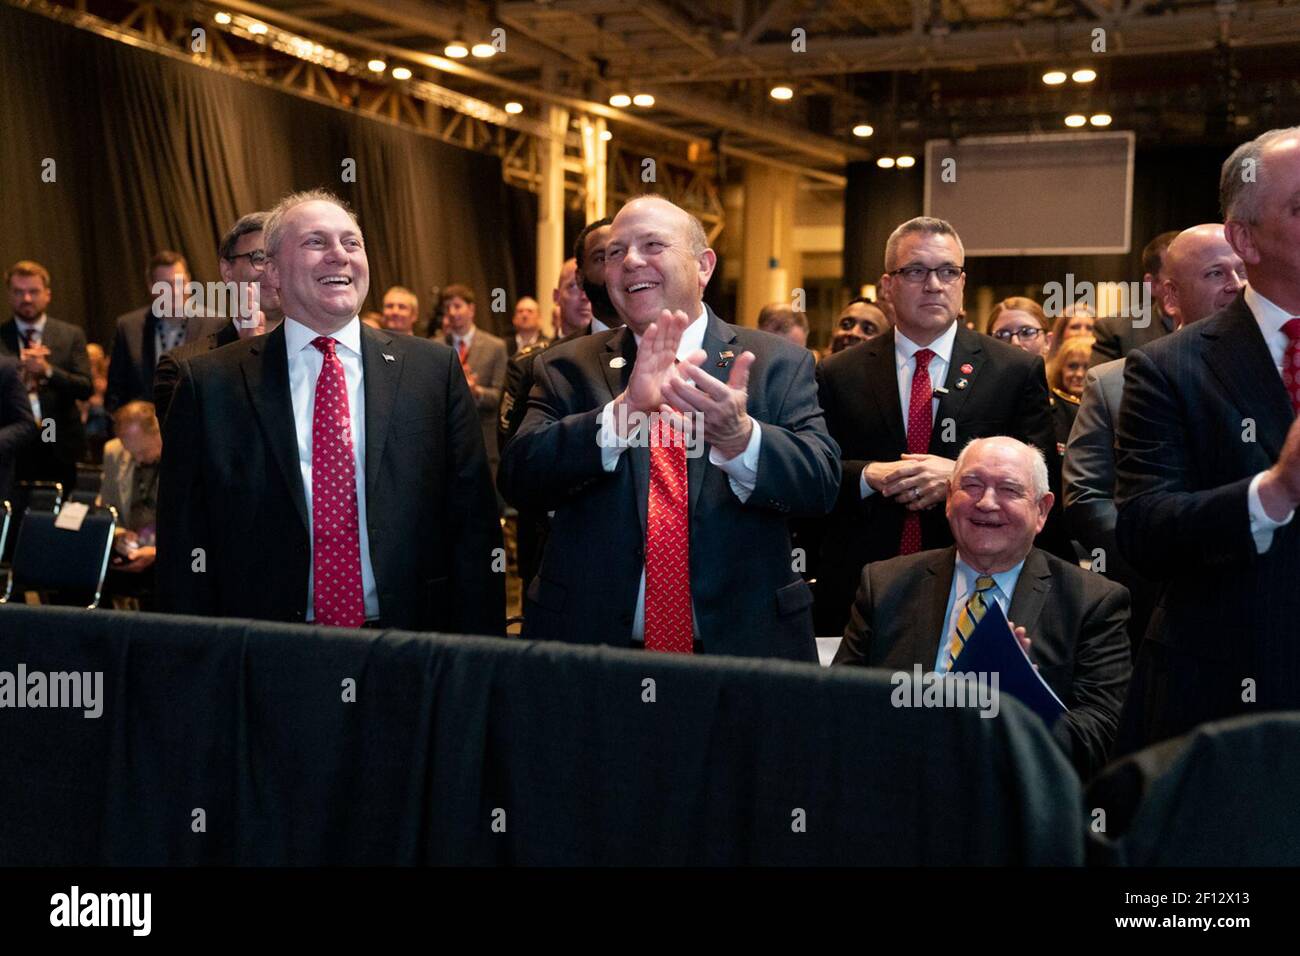 House Minority Whip Rep. Steve Scalise (R-LA) Zippy Duvall the President of the American Farm Bureau Federation and Secretary of Agriculture Sonny Perdue share a laugh with President Donald Trump during his remarks at the American Farm Bureau Federationâ€™s 100th Annual Convention Monday January 14 2019 at the New Orleans Ernest N. Morial Convention Center in New Orleans Louisiana. Stock Photo